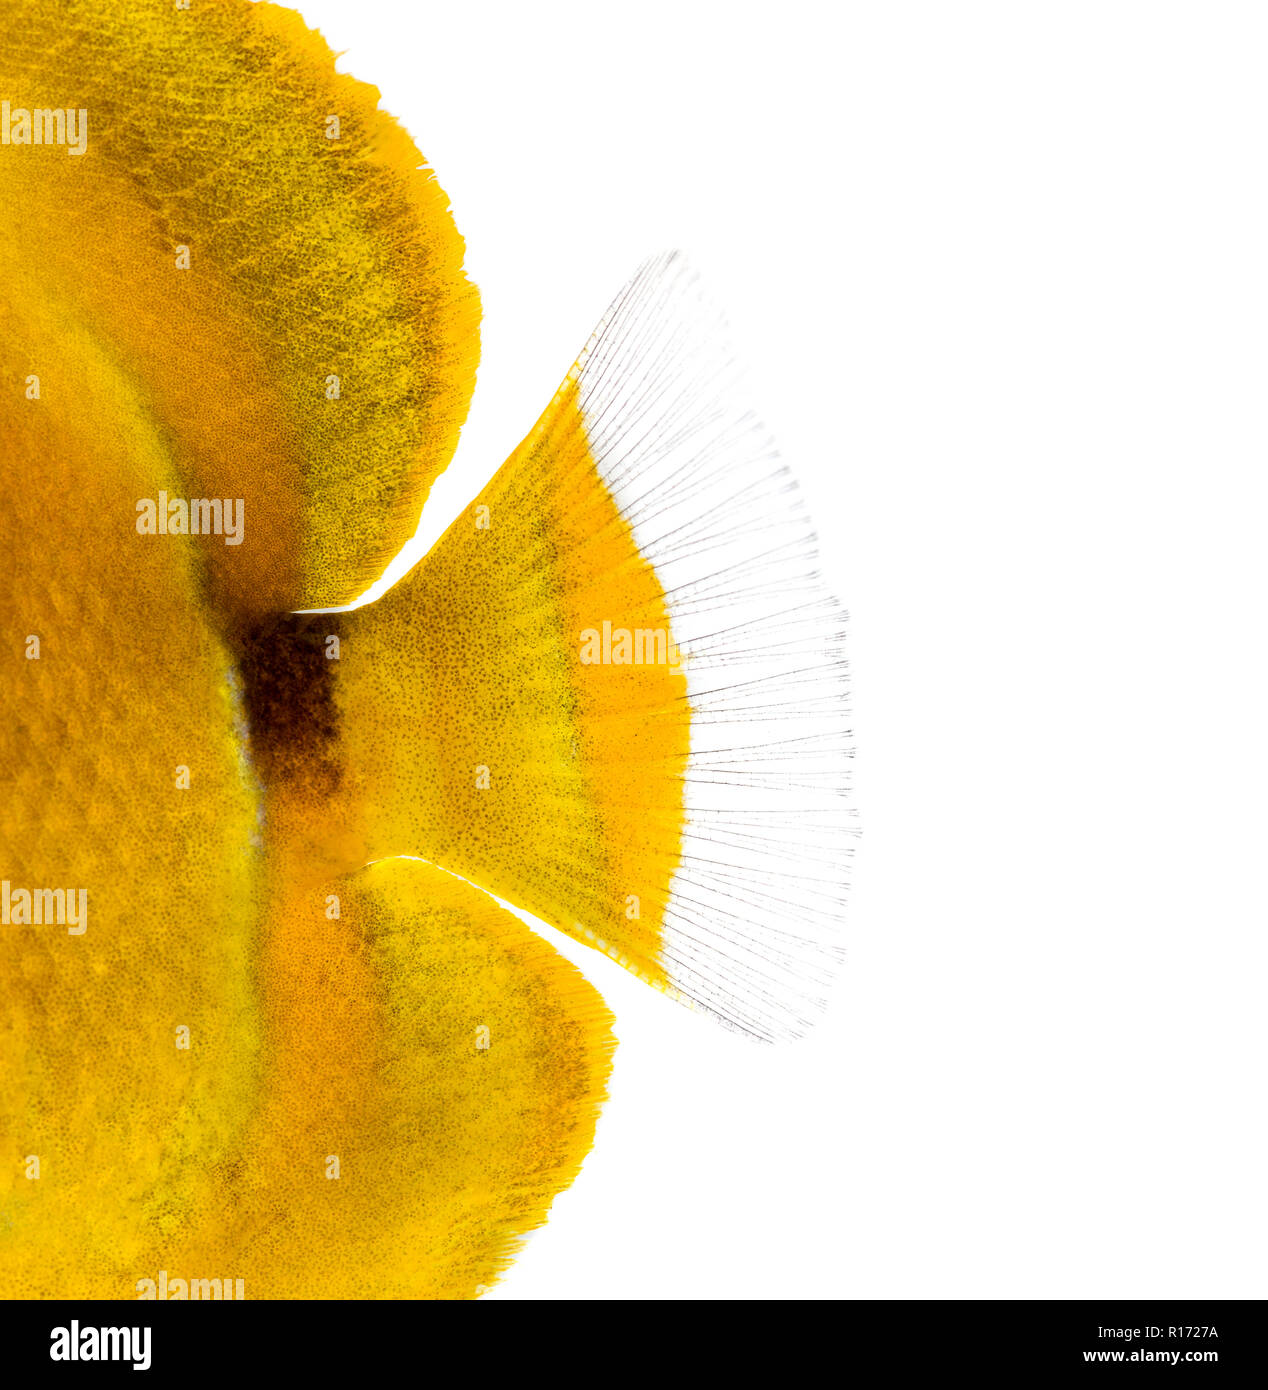 Close-up of a Bluelashed butterflyfish's caudal fin, Chaetodon bennetti, isolated on white. Stock Photo